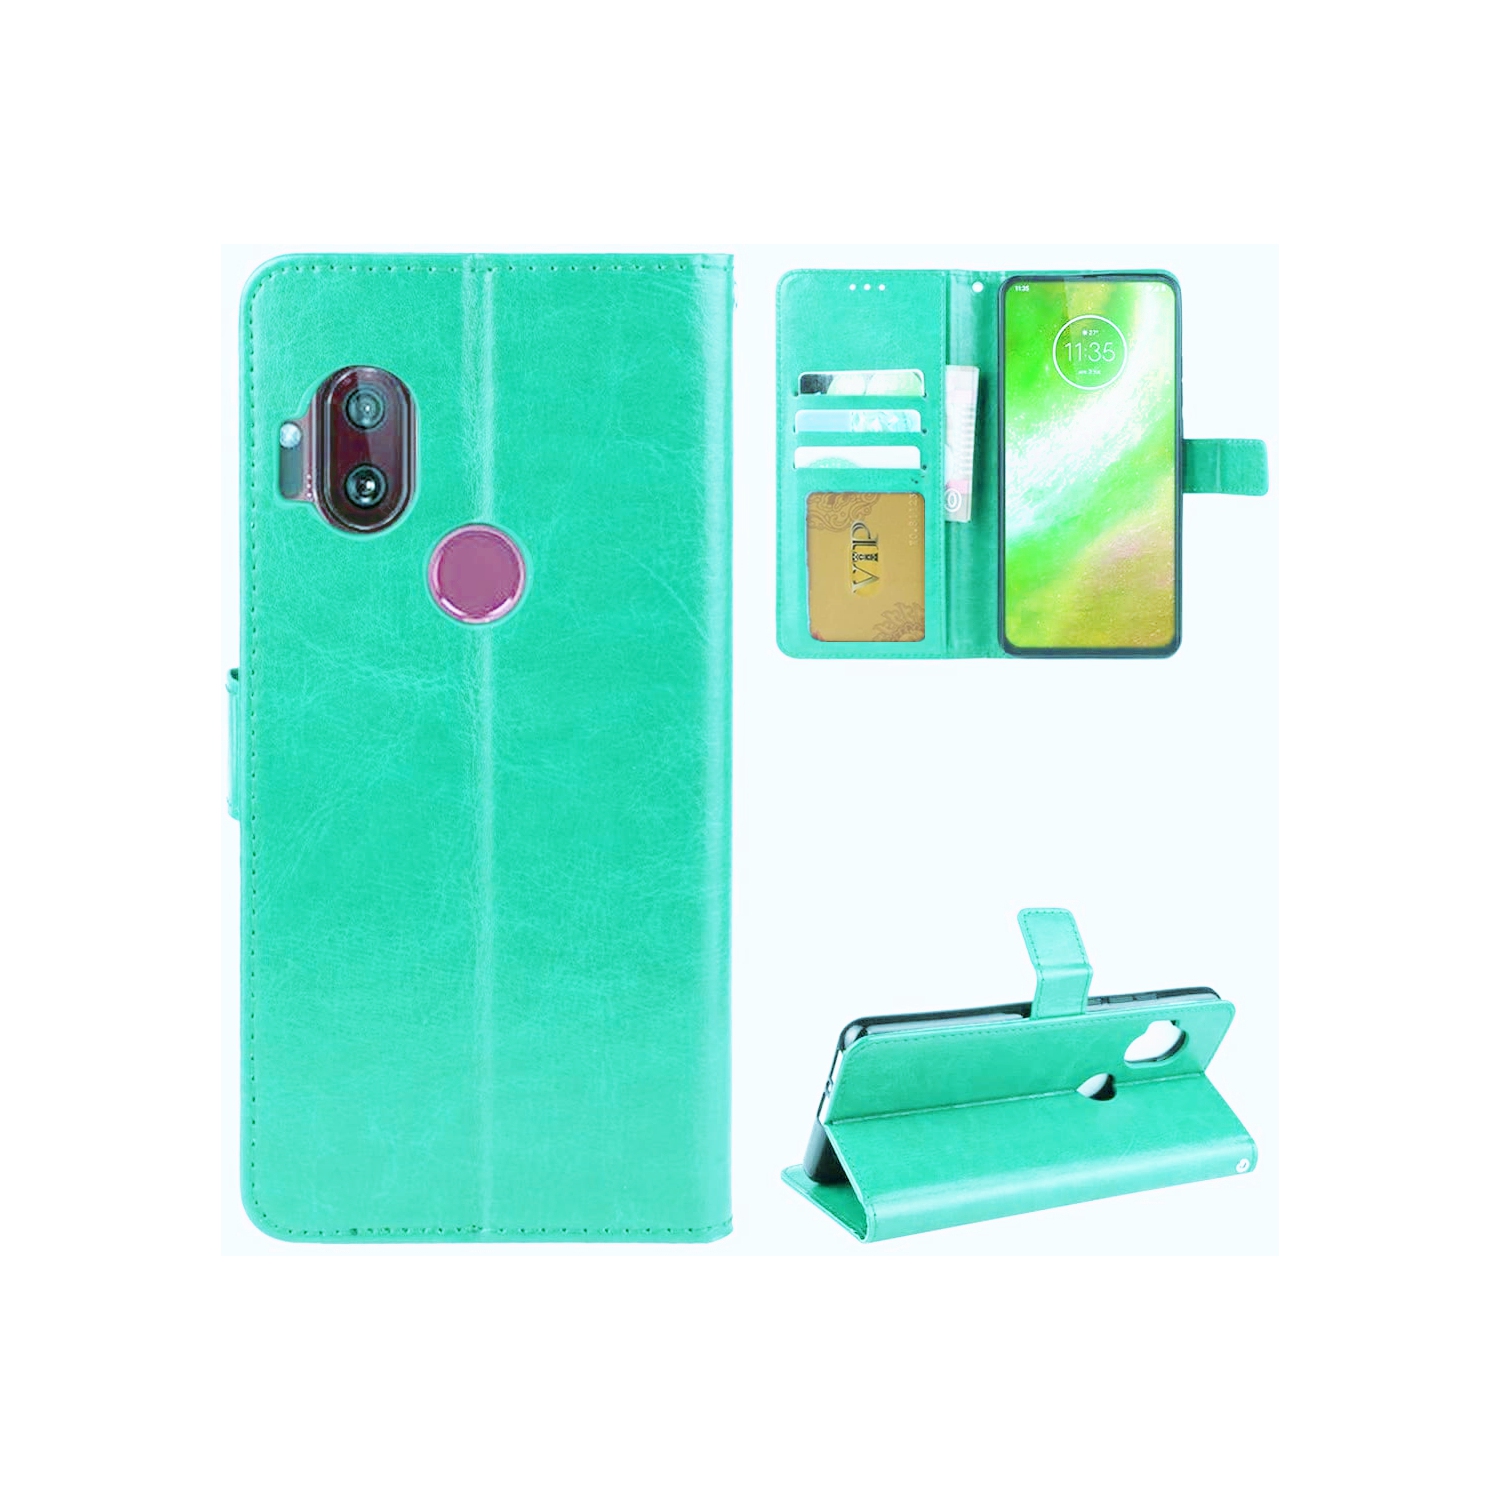 [CS] Motorola Moto One Hyper Case, Magnetic Leather Folio Wallet Flip Case Cover with Card Slot, Teal